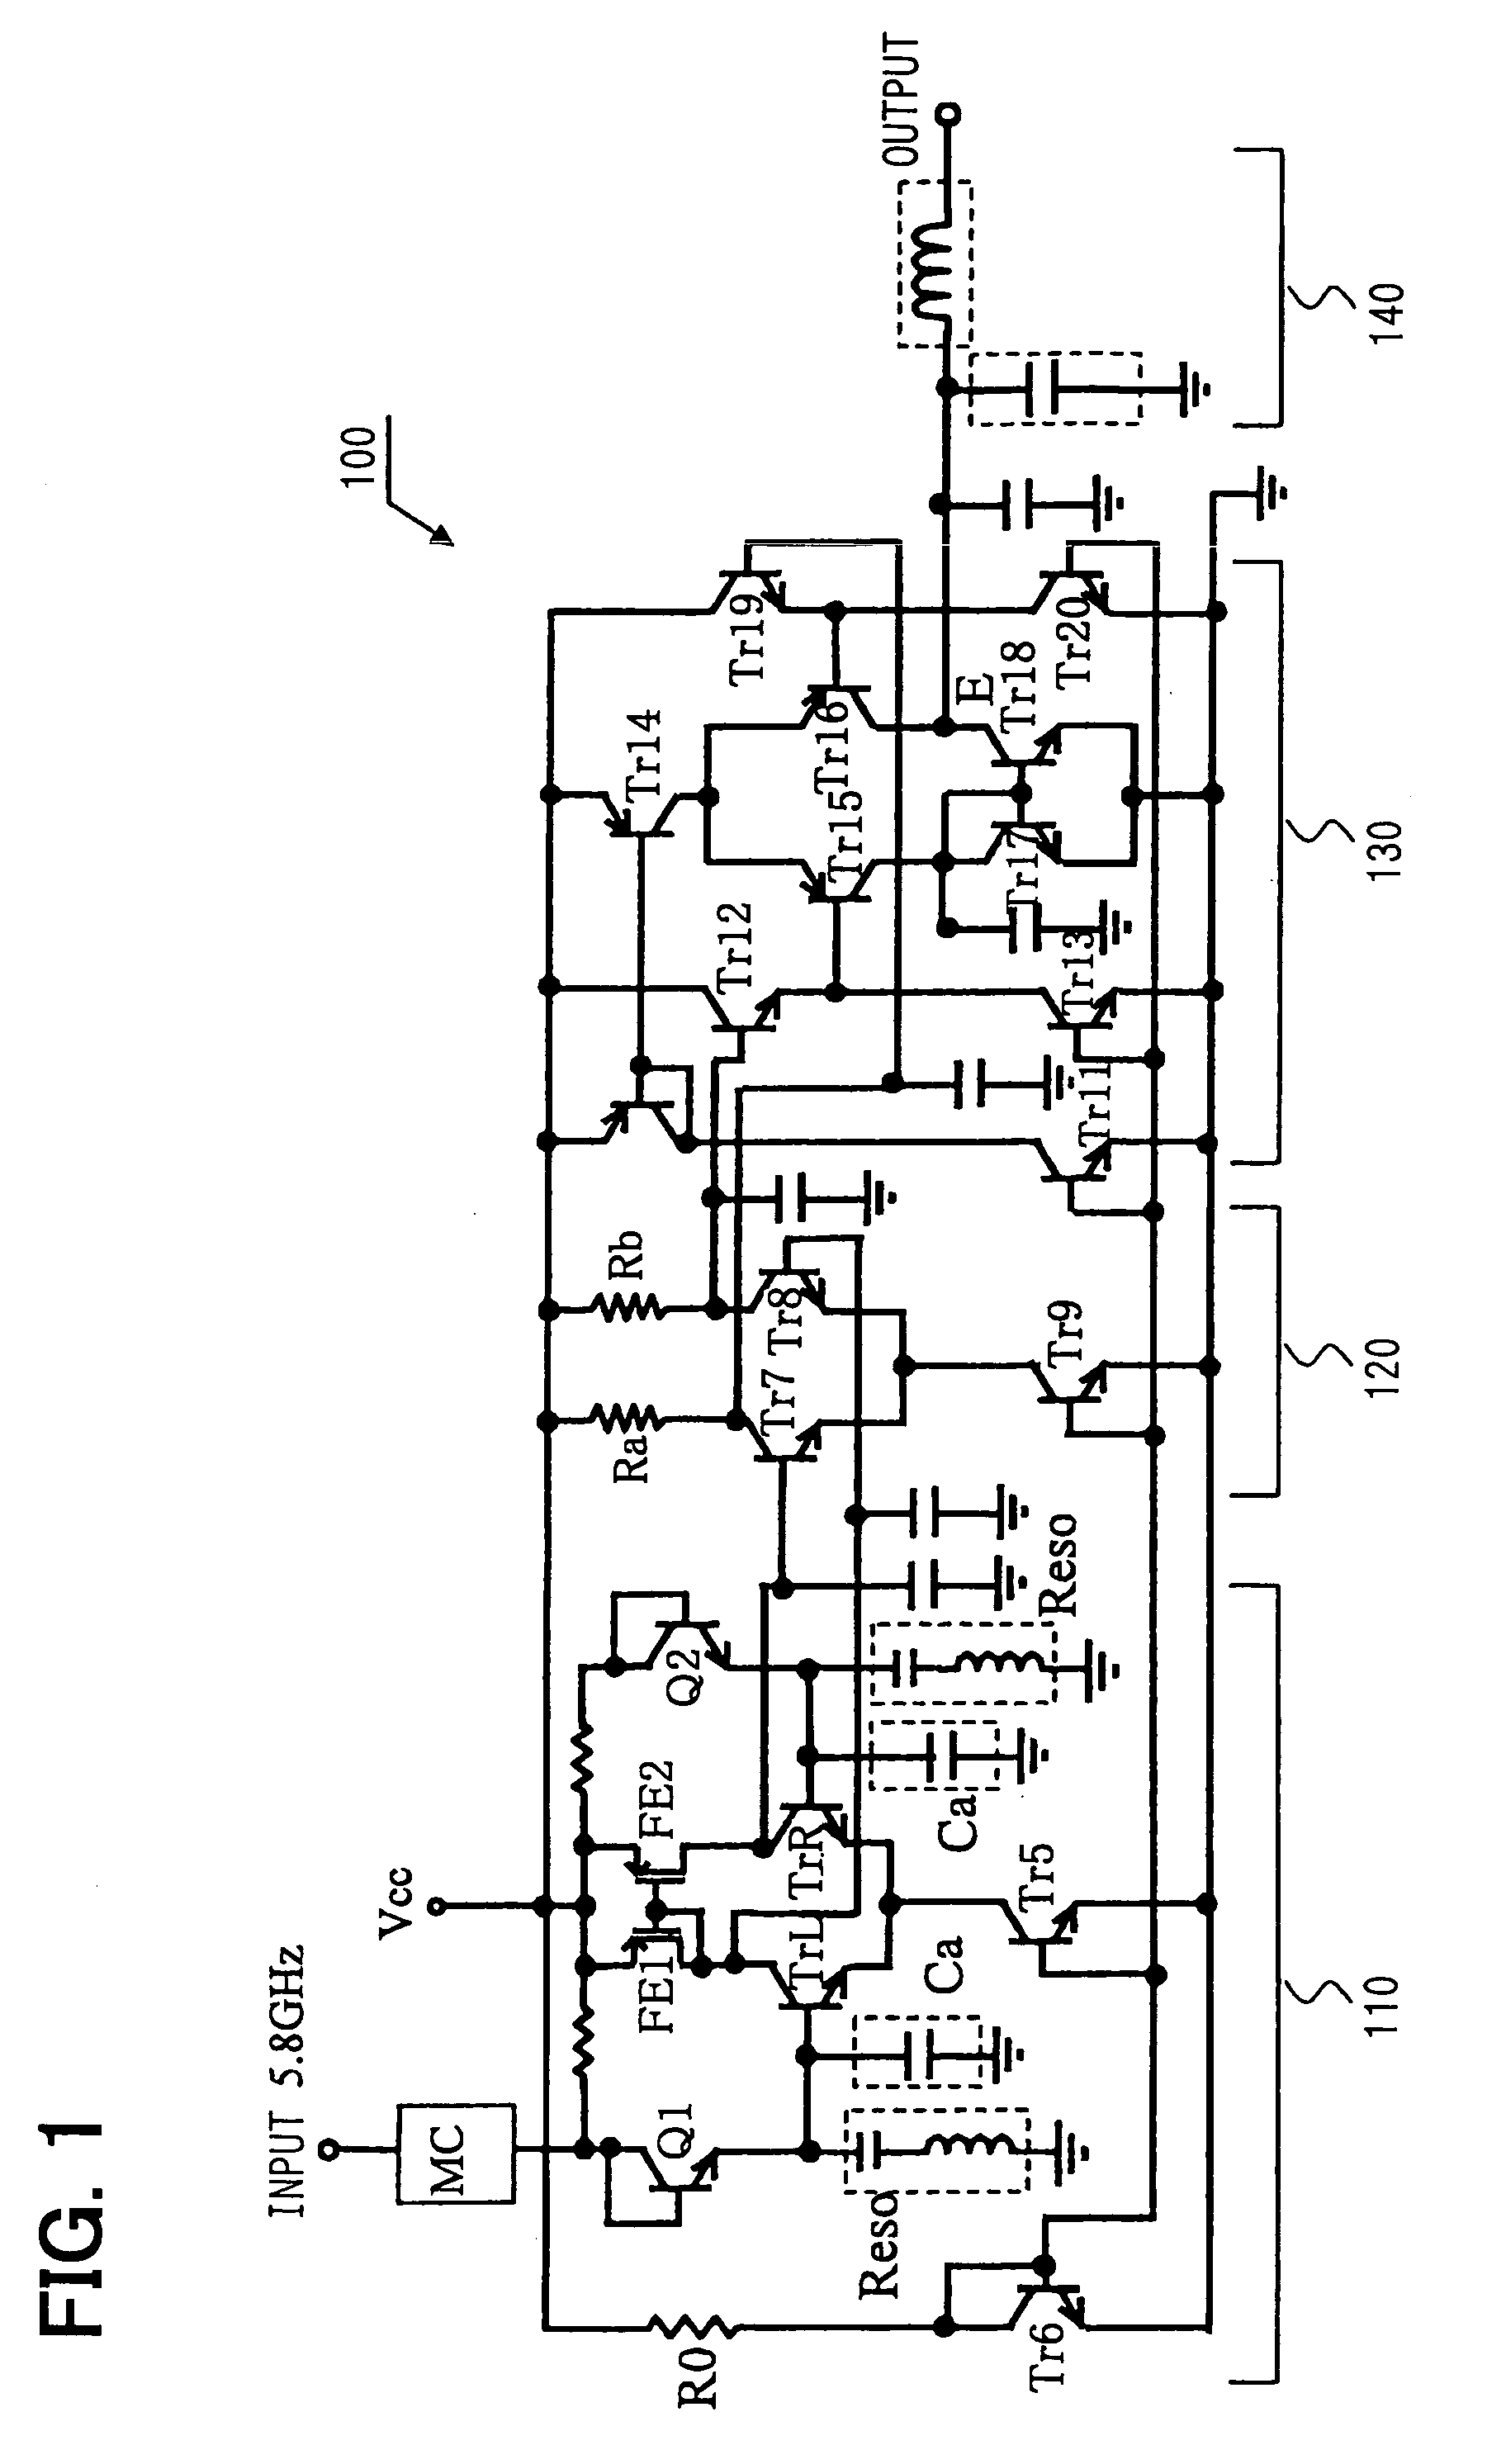 Activation signal output circuit and determination circuit